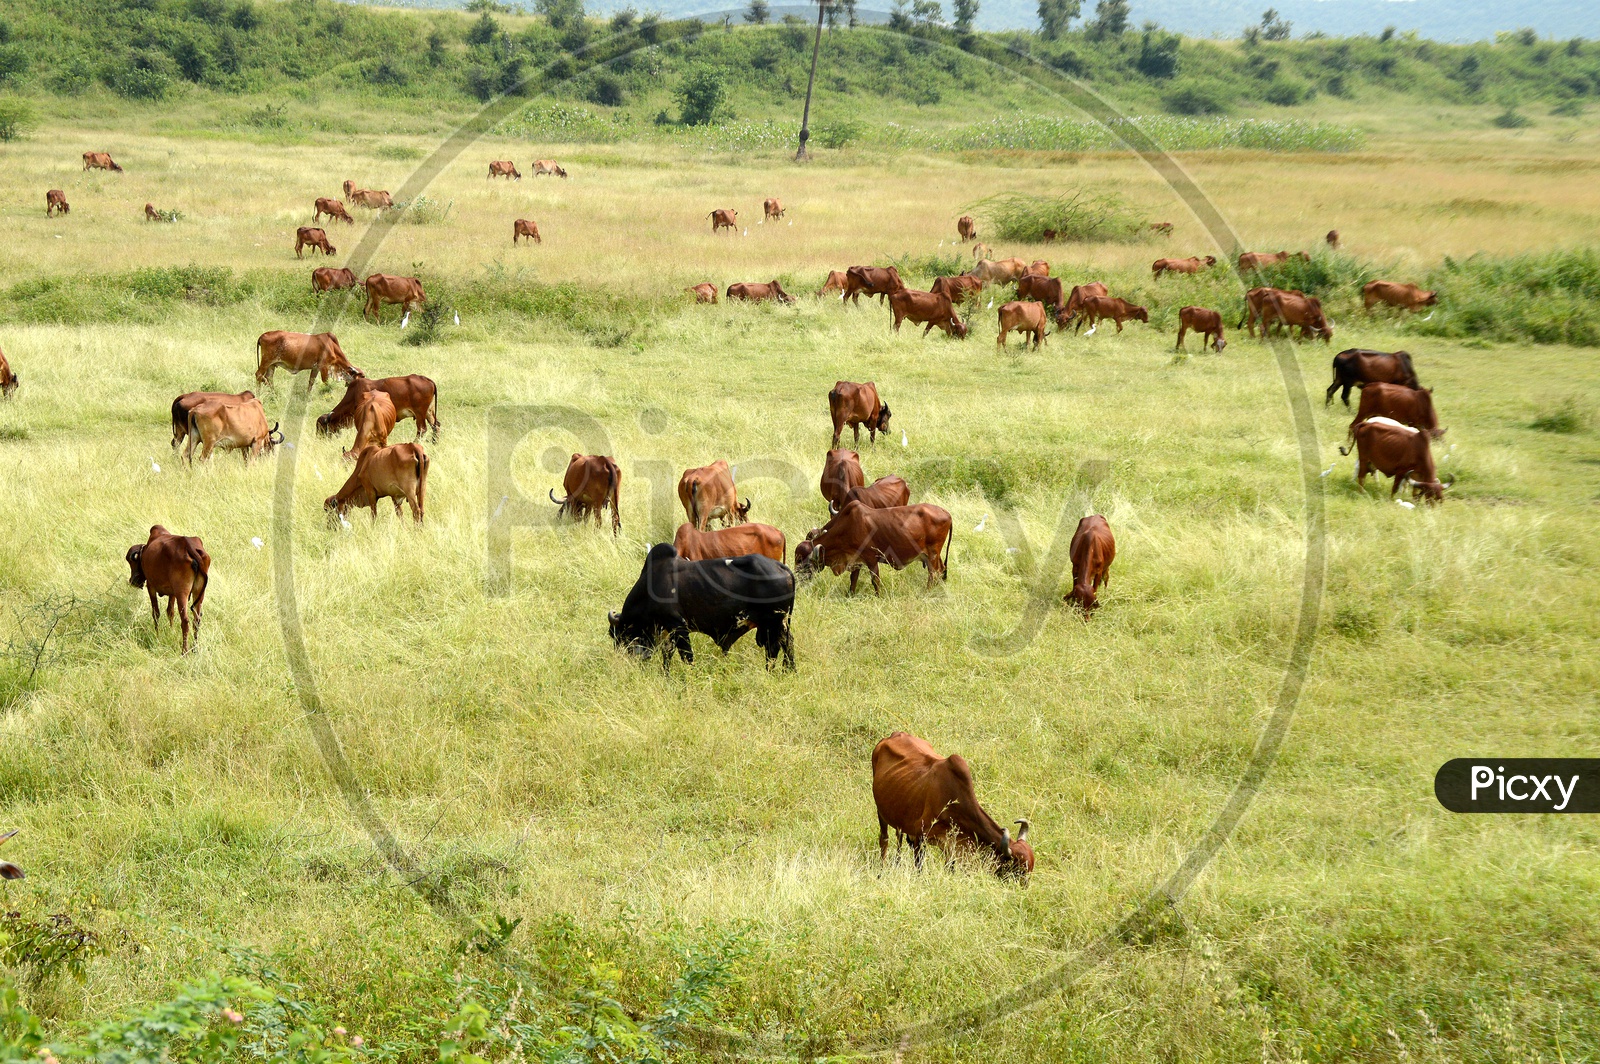 Cows and bulls grazing on lush grass field